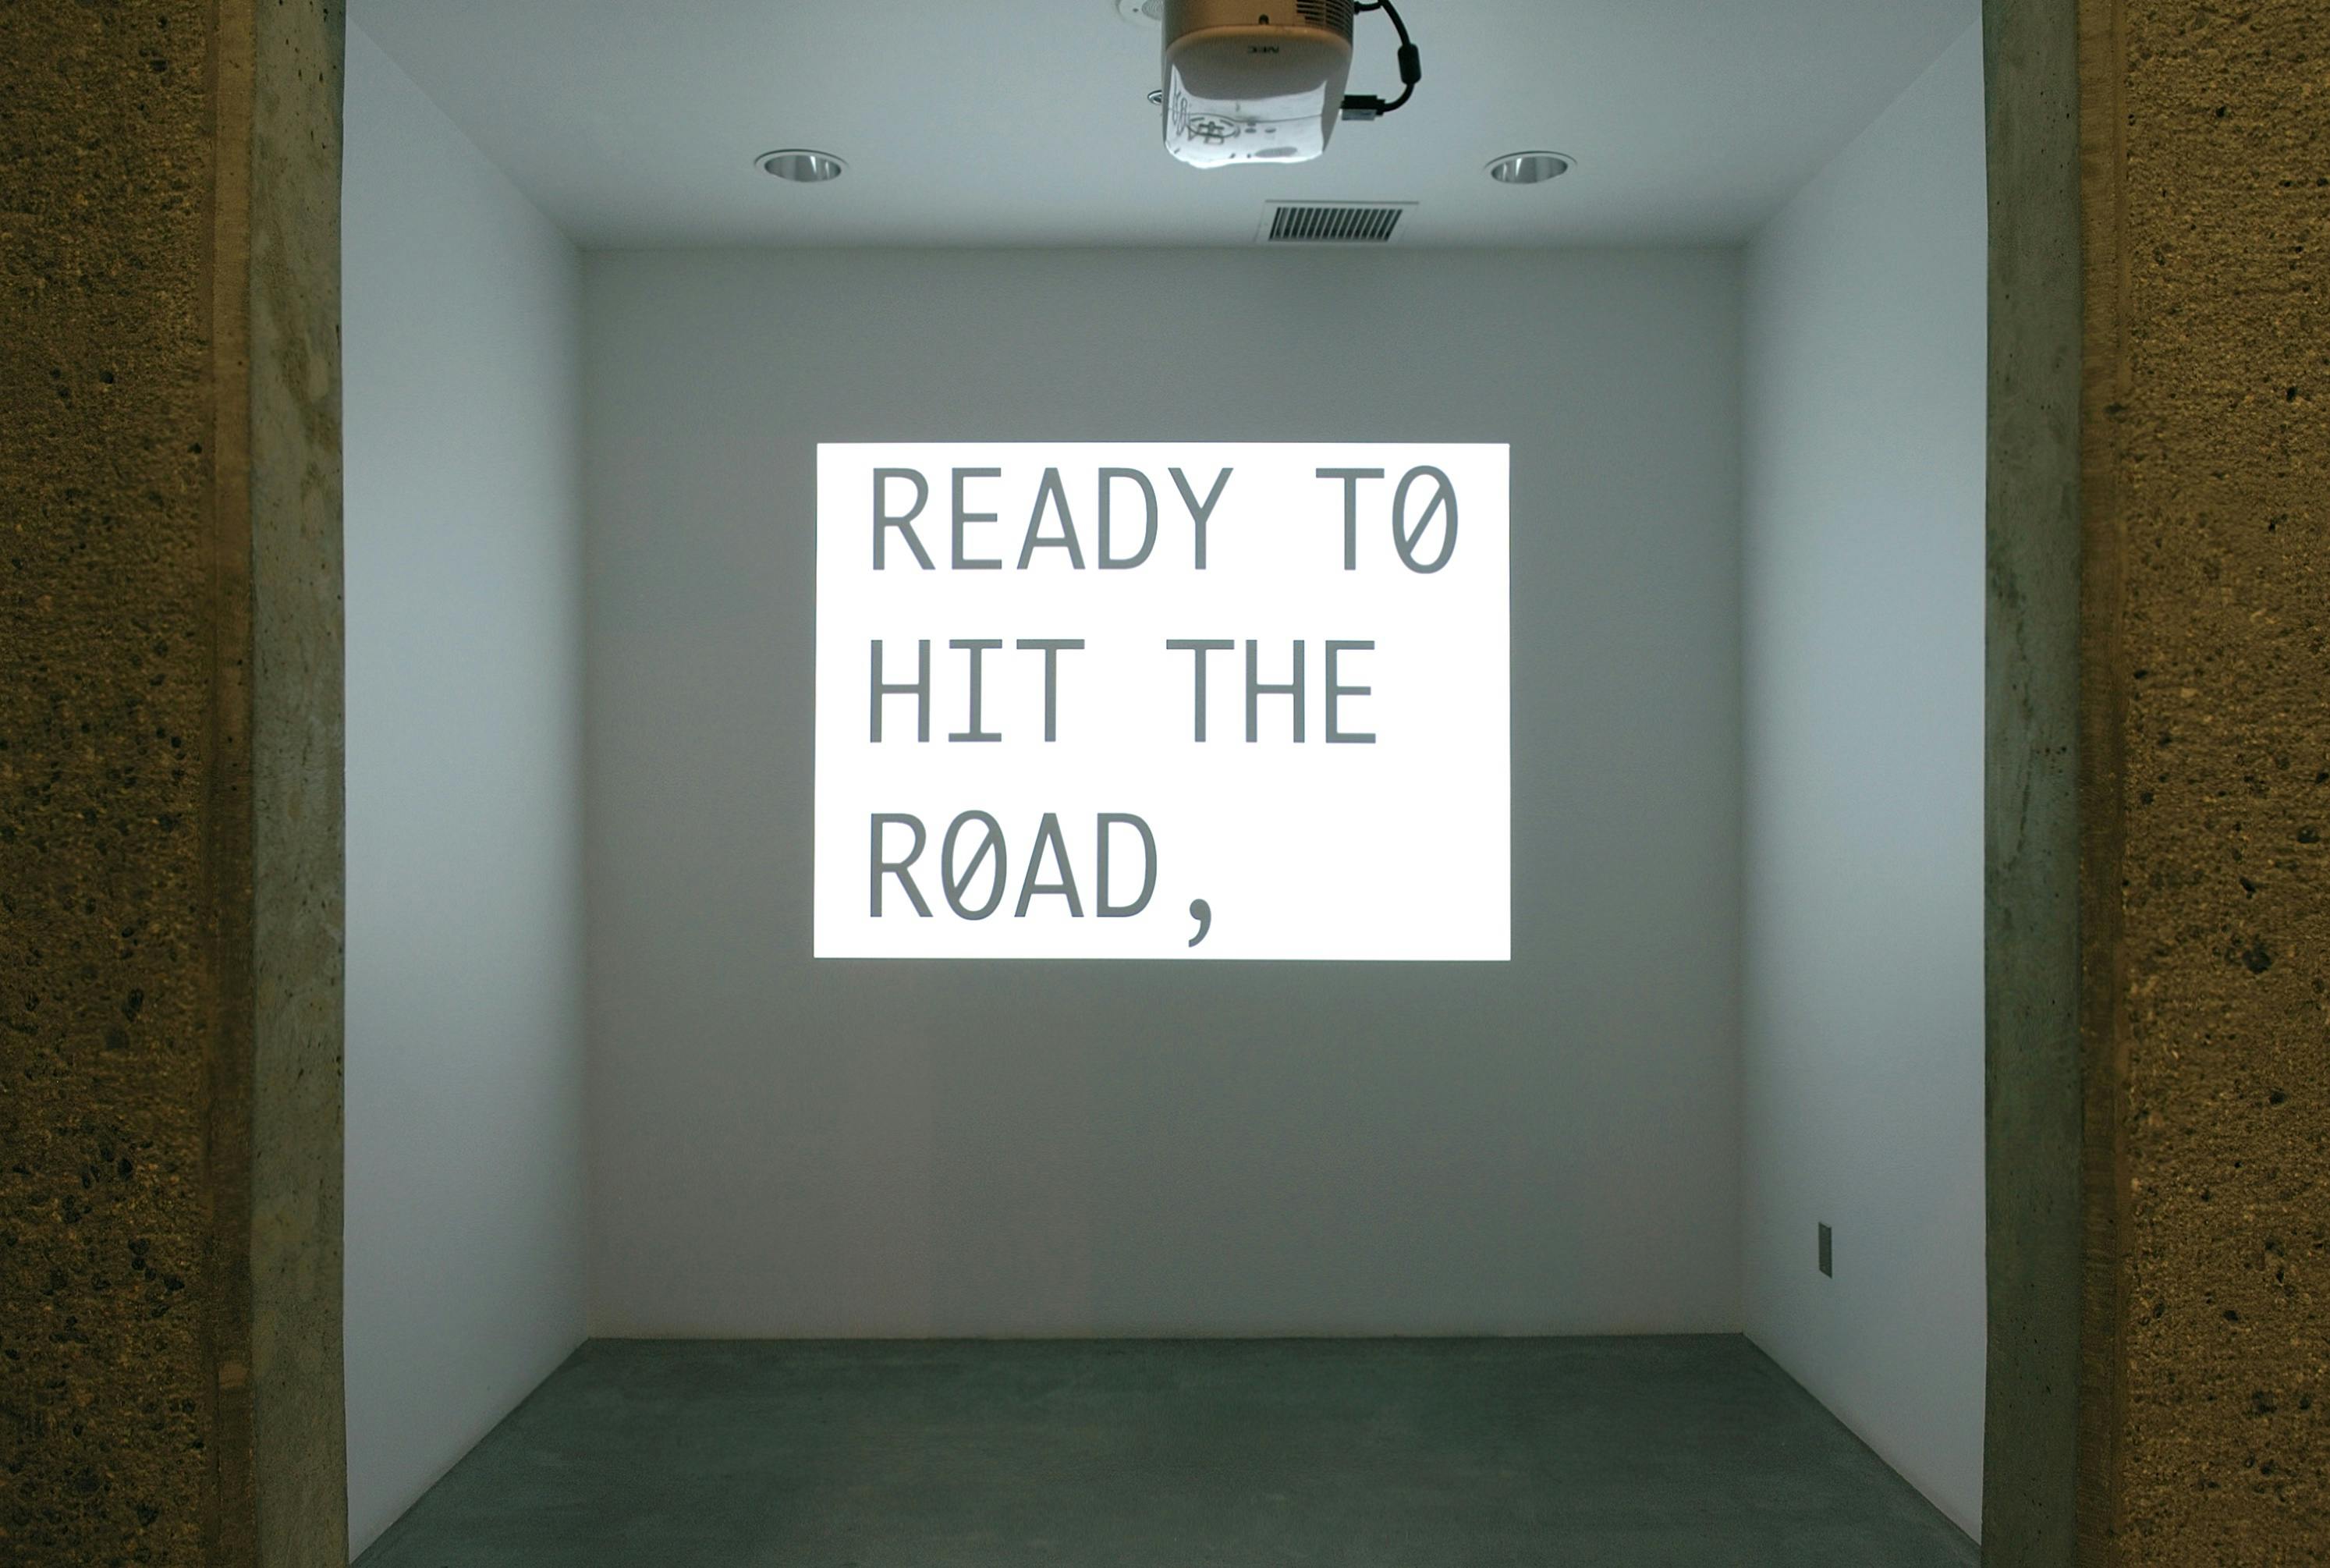 In a small gallery space, a projector is hanging from the ceiling. It projects a slide to the wall. The phrase that appears in the image reads, “ready to hit the road,” in upper letters.